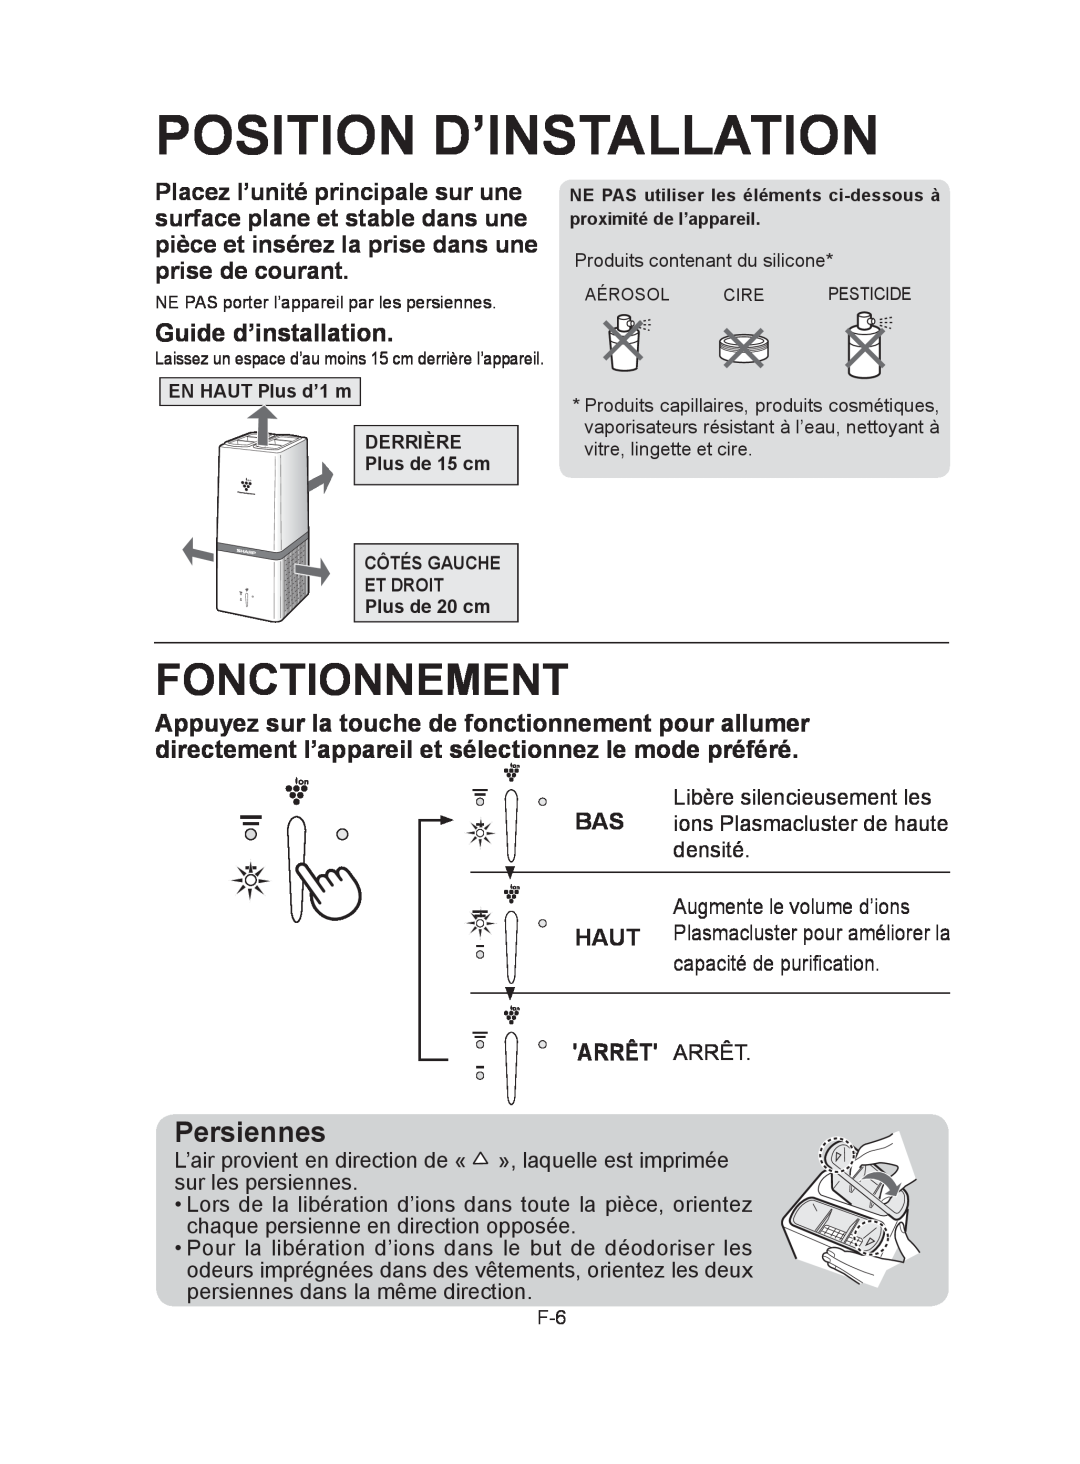 Sharp IG-A10U operation manual Position D’Installation, Fonctionnement, Persiennes, Guide d’installation 